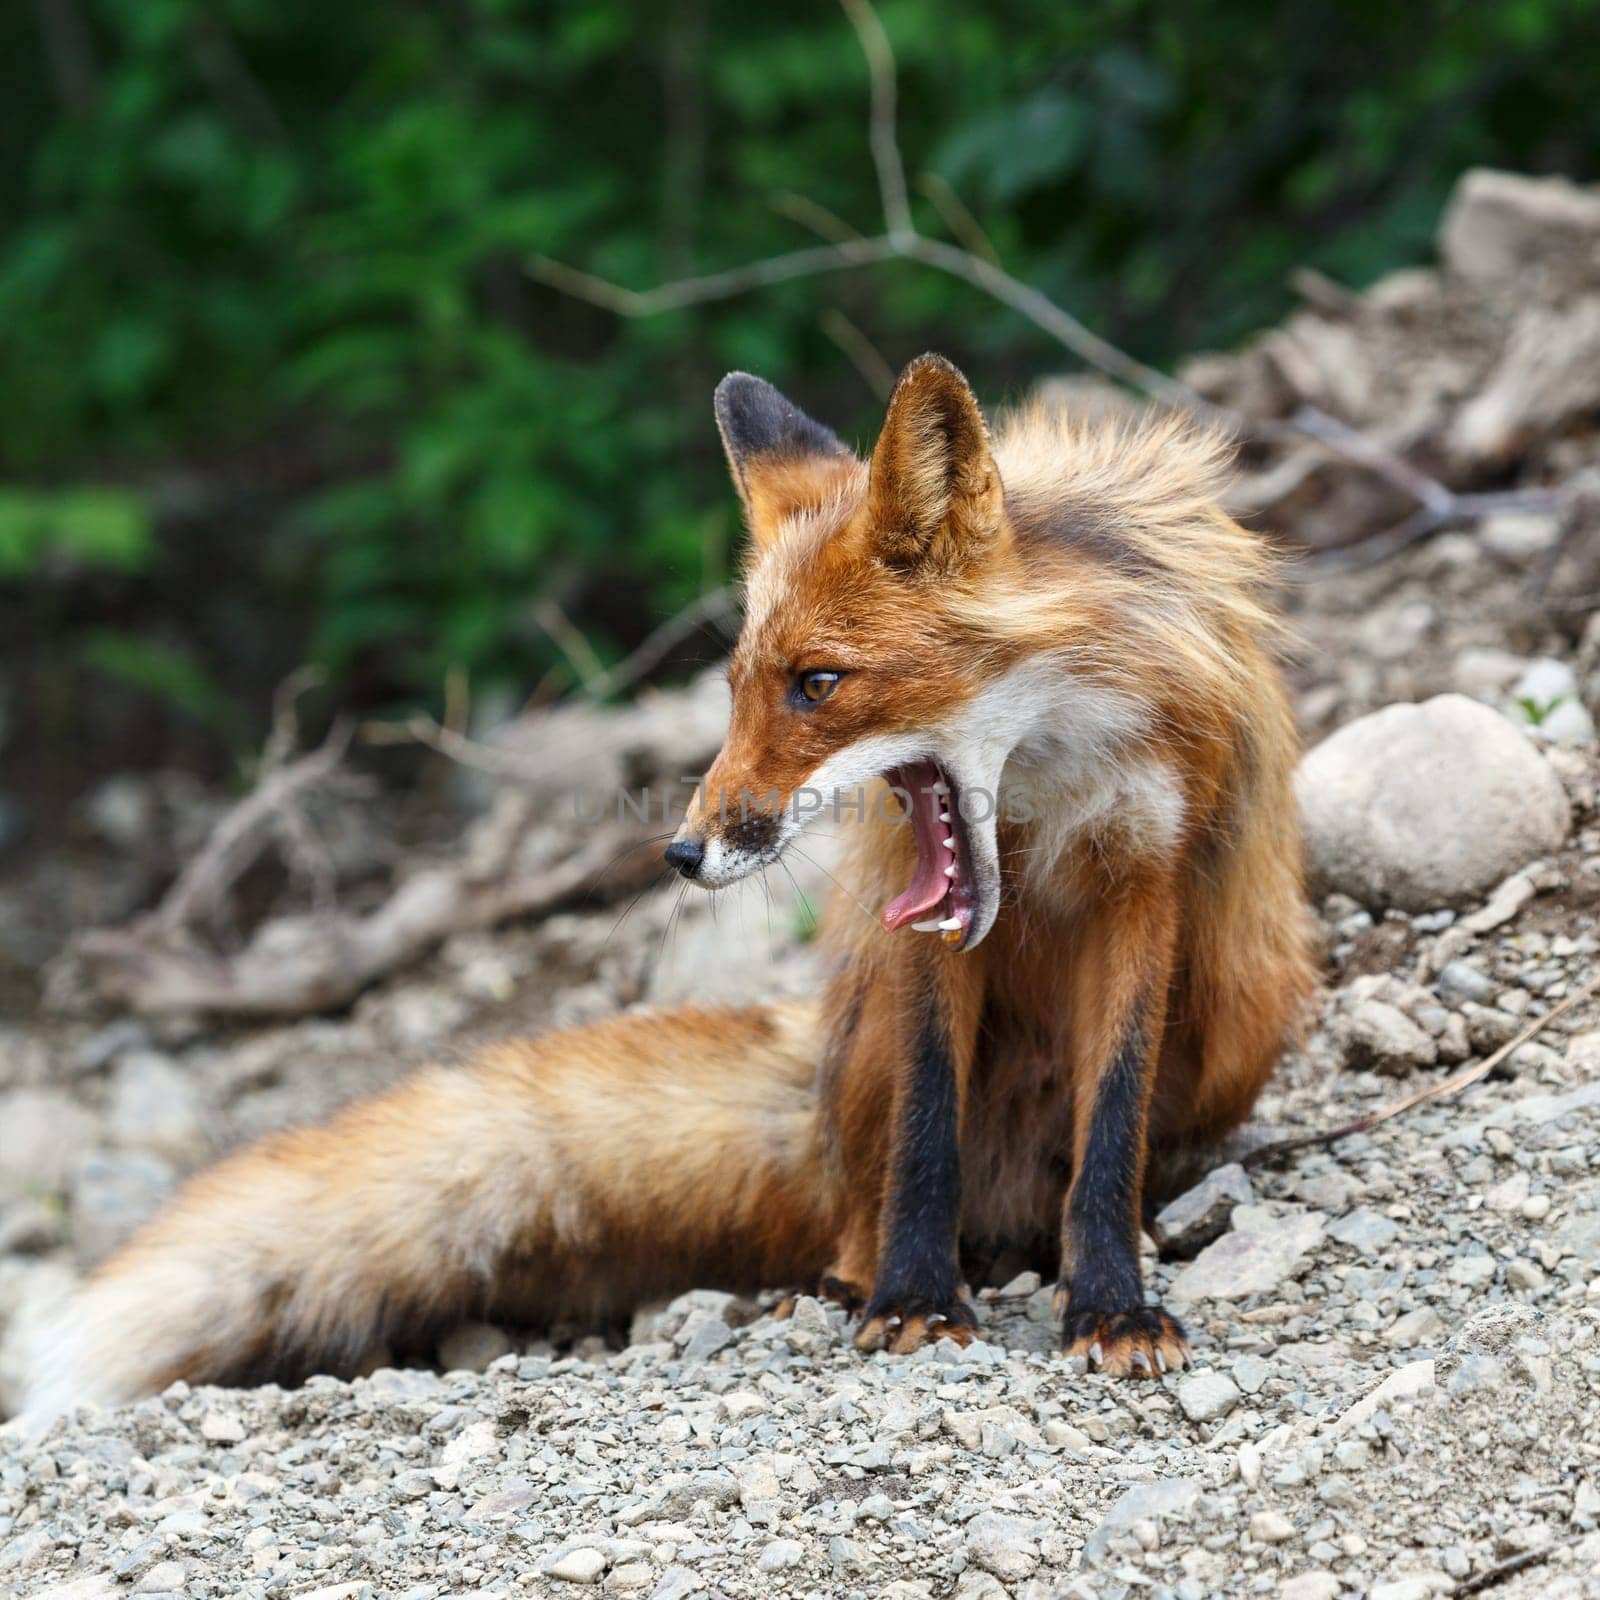 Wild nature of Kamchatka: beautiful red fox with open mouth. Russia, Far East, Kamchatka Peninsula.